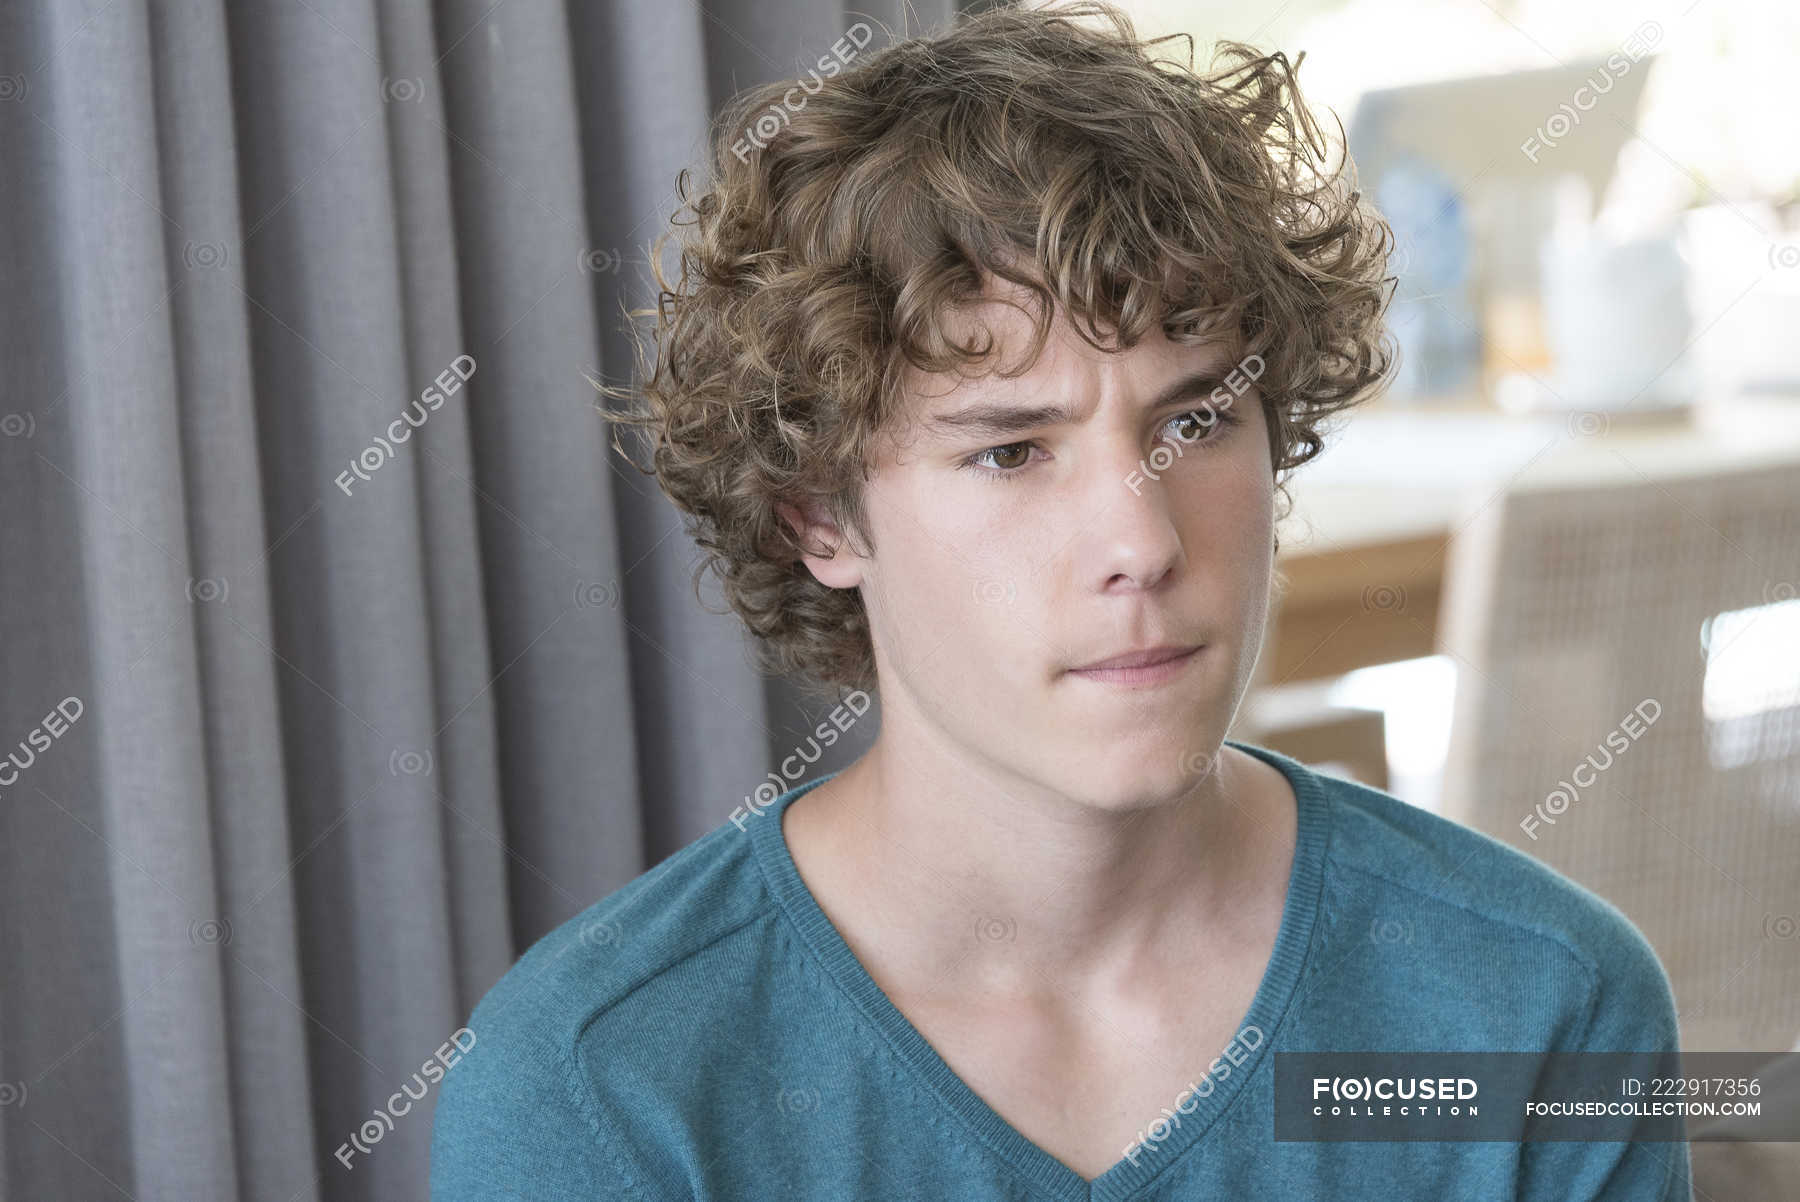 Close-up of teenage boy with curly hair thinking — room, Anxiety - Stock  Photo | #222917356